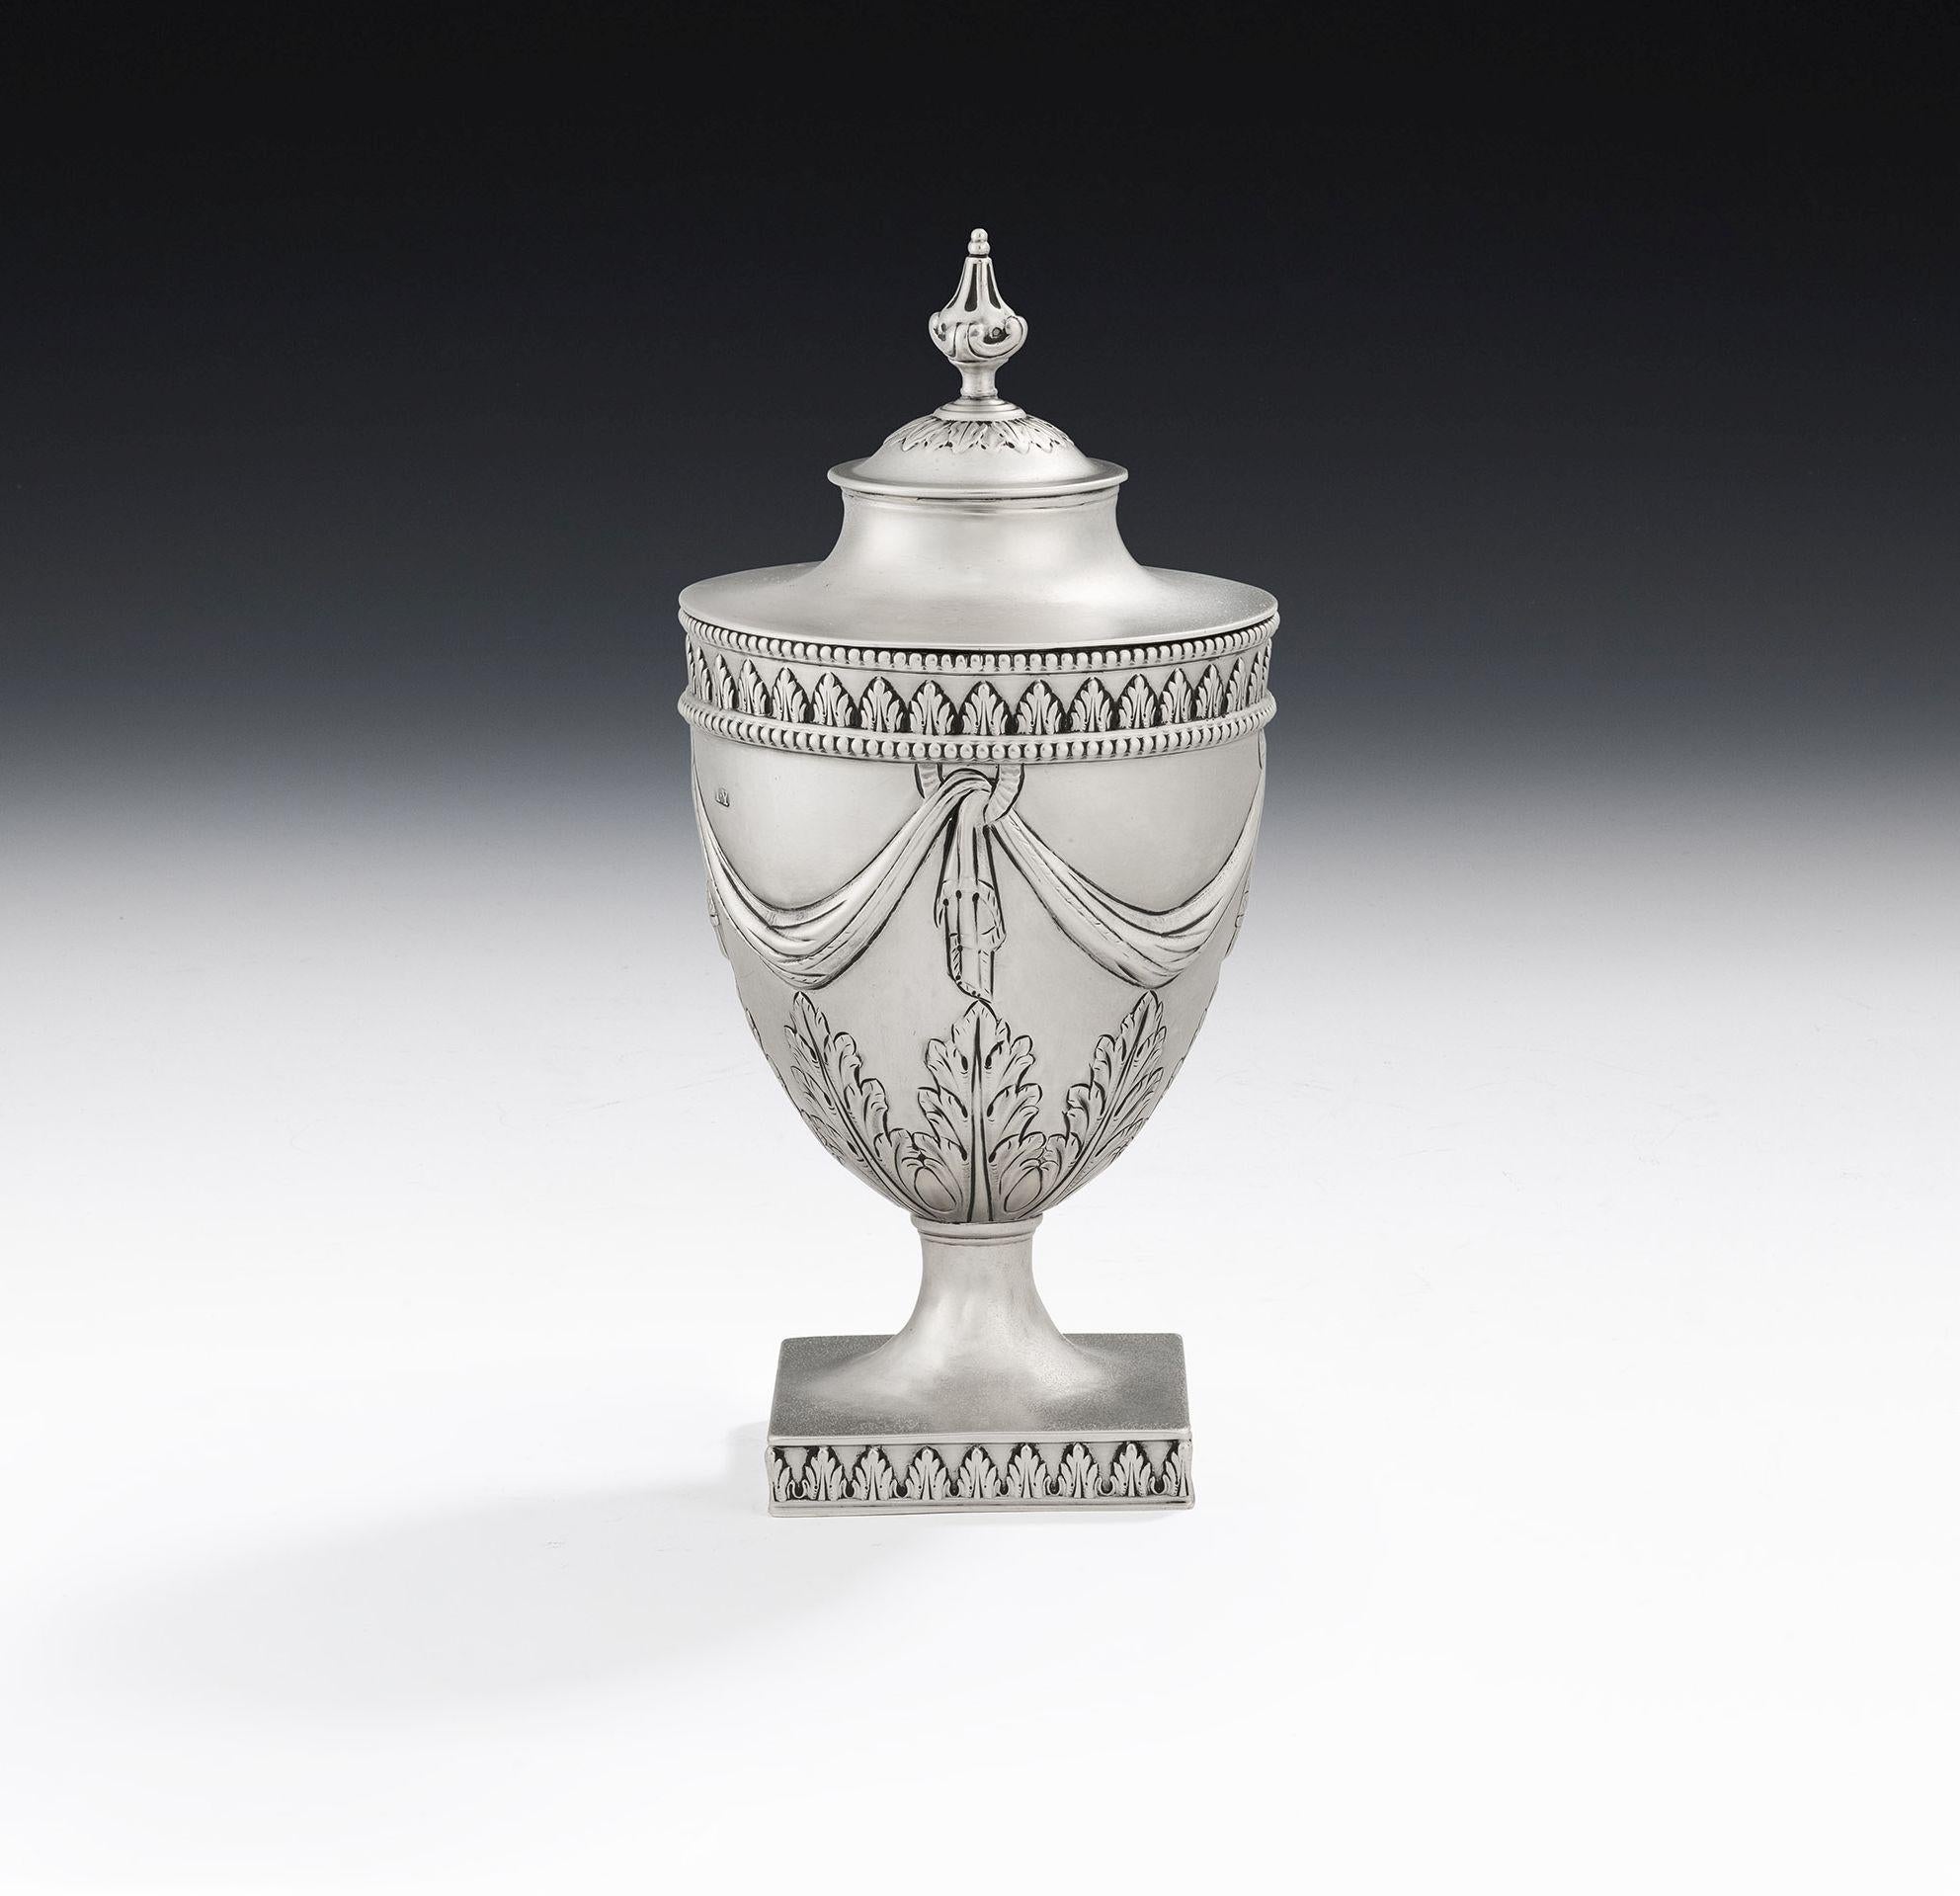 This very rare antique sterling silver neoclassical sugar, or tea, vase was made in Sheffield in 1775 by Richard Morton & Company. This exceptional example stands on a square pedestal foot which is decorated with a band of acanthus spears. The vase